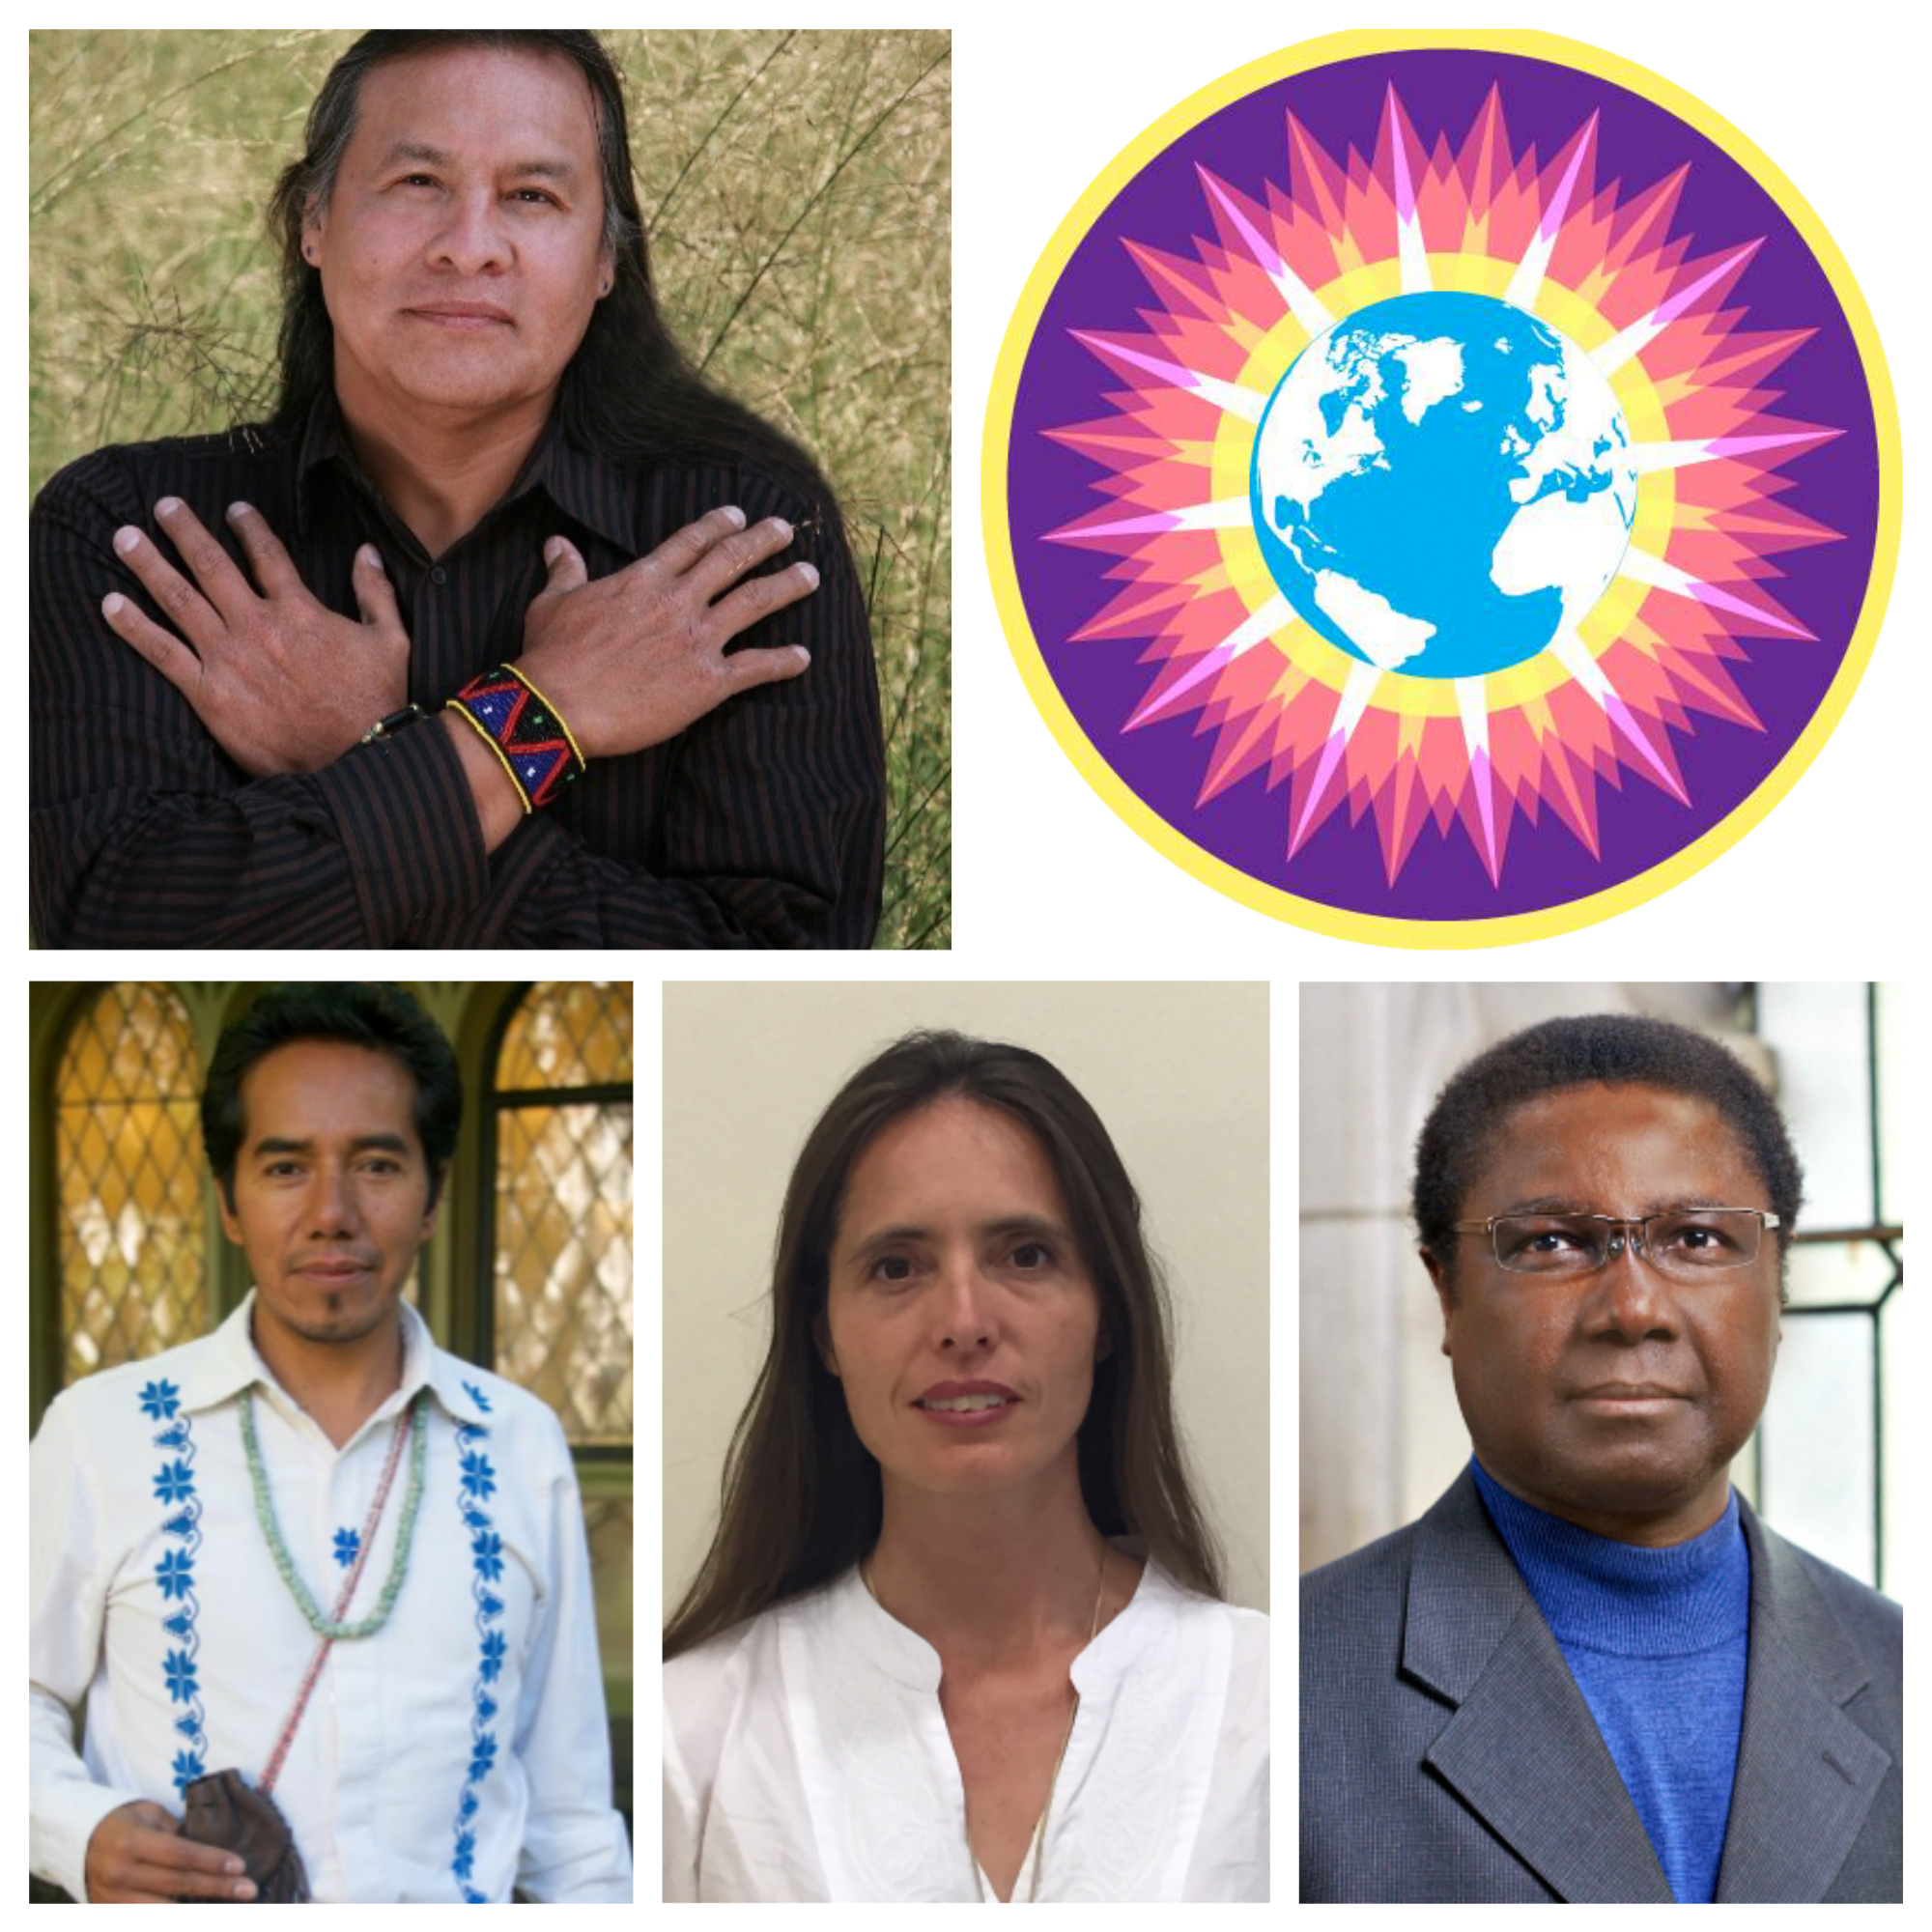 Eagle and Condor Consciousness: An Evening with Three Thinkers in the Native Way @ James Chapel | New York | New York | United States